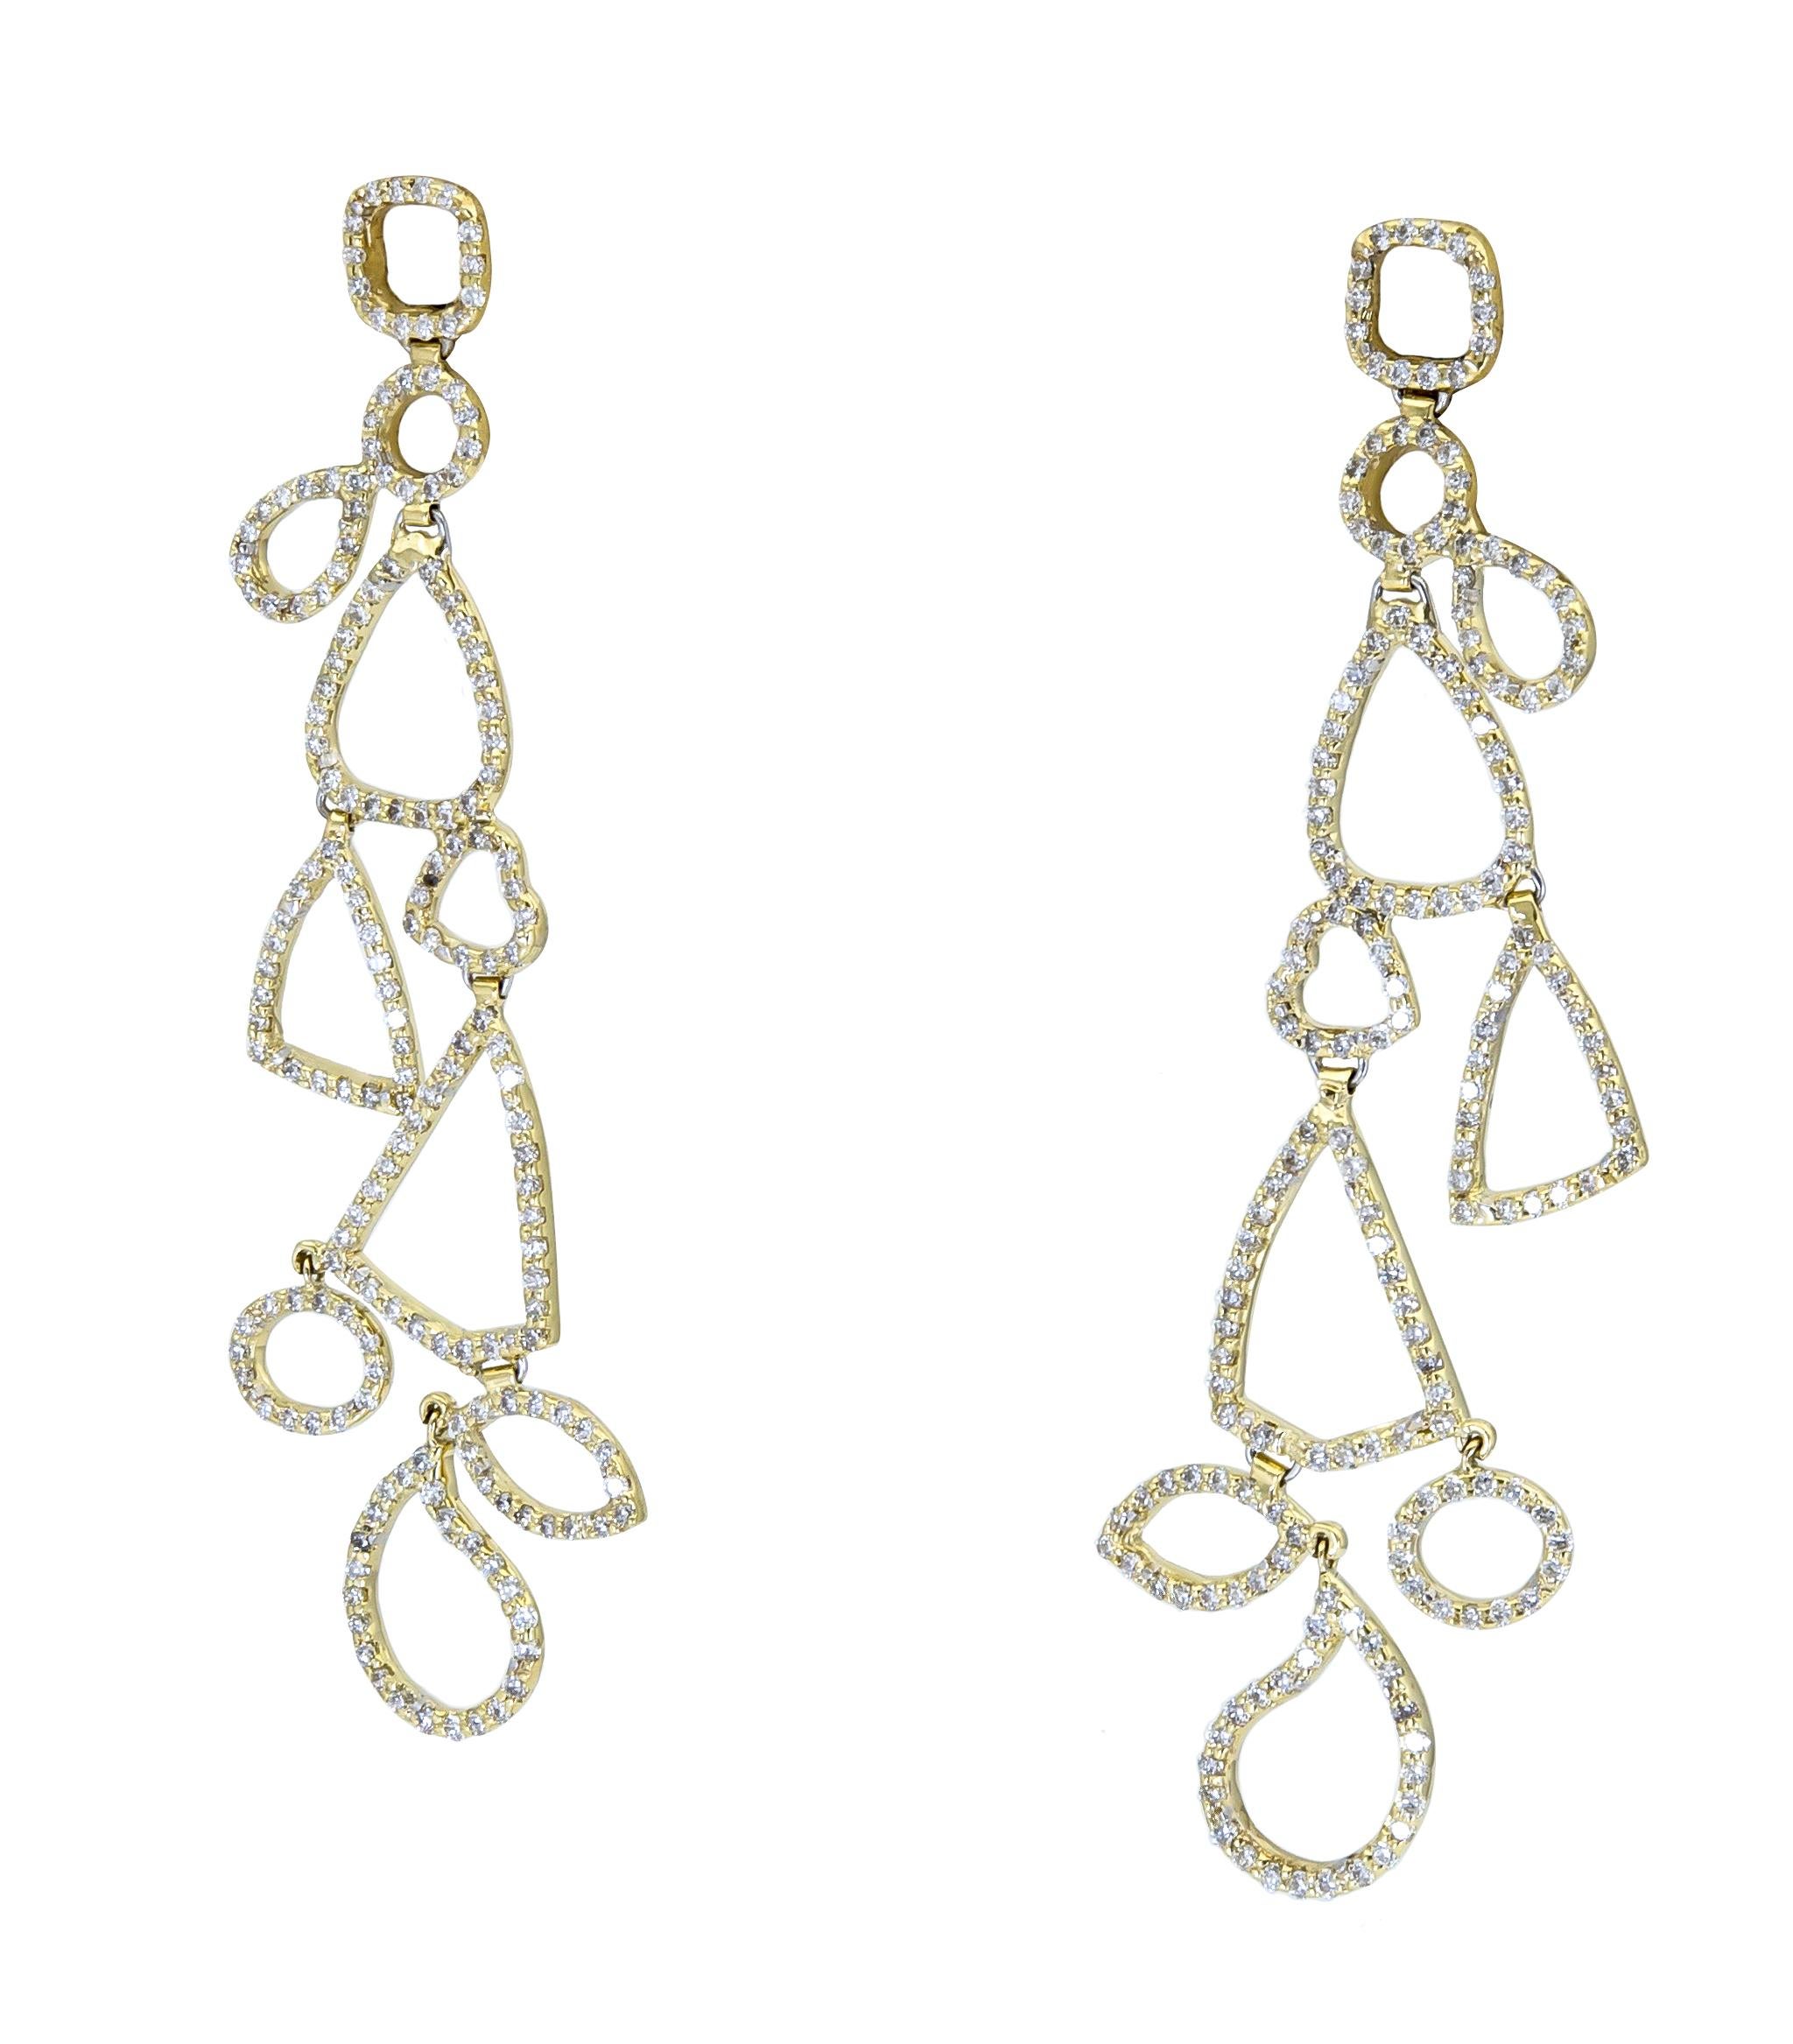 Modern design earrings showcasing open-work geometric shapes accented with round brilliant diamonds.
Made in 18k yellow gold.
Diamonds weigh 3.50 carats total.
Dimensions: 2.80in (L) x 1.10in (W)
Pushback earrings
Creator: Ely Adams